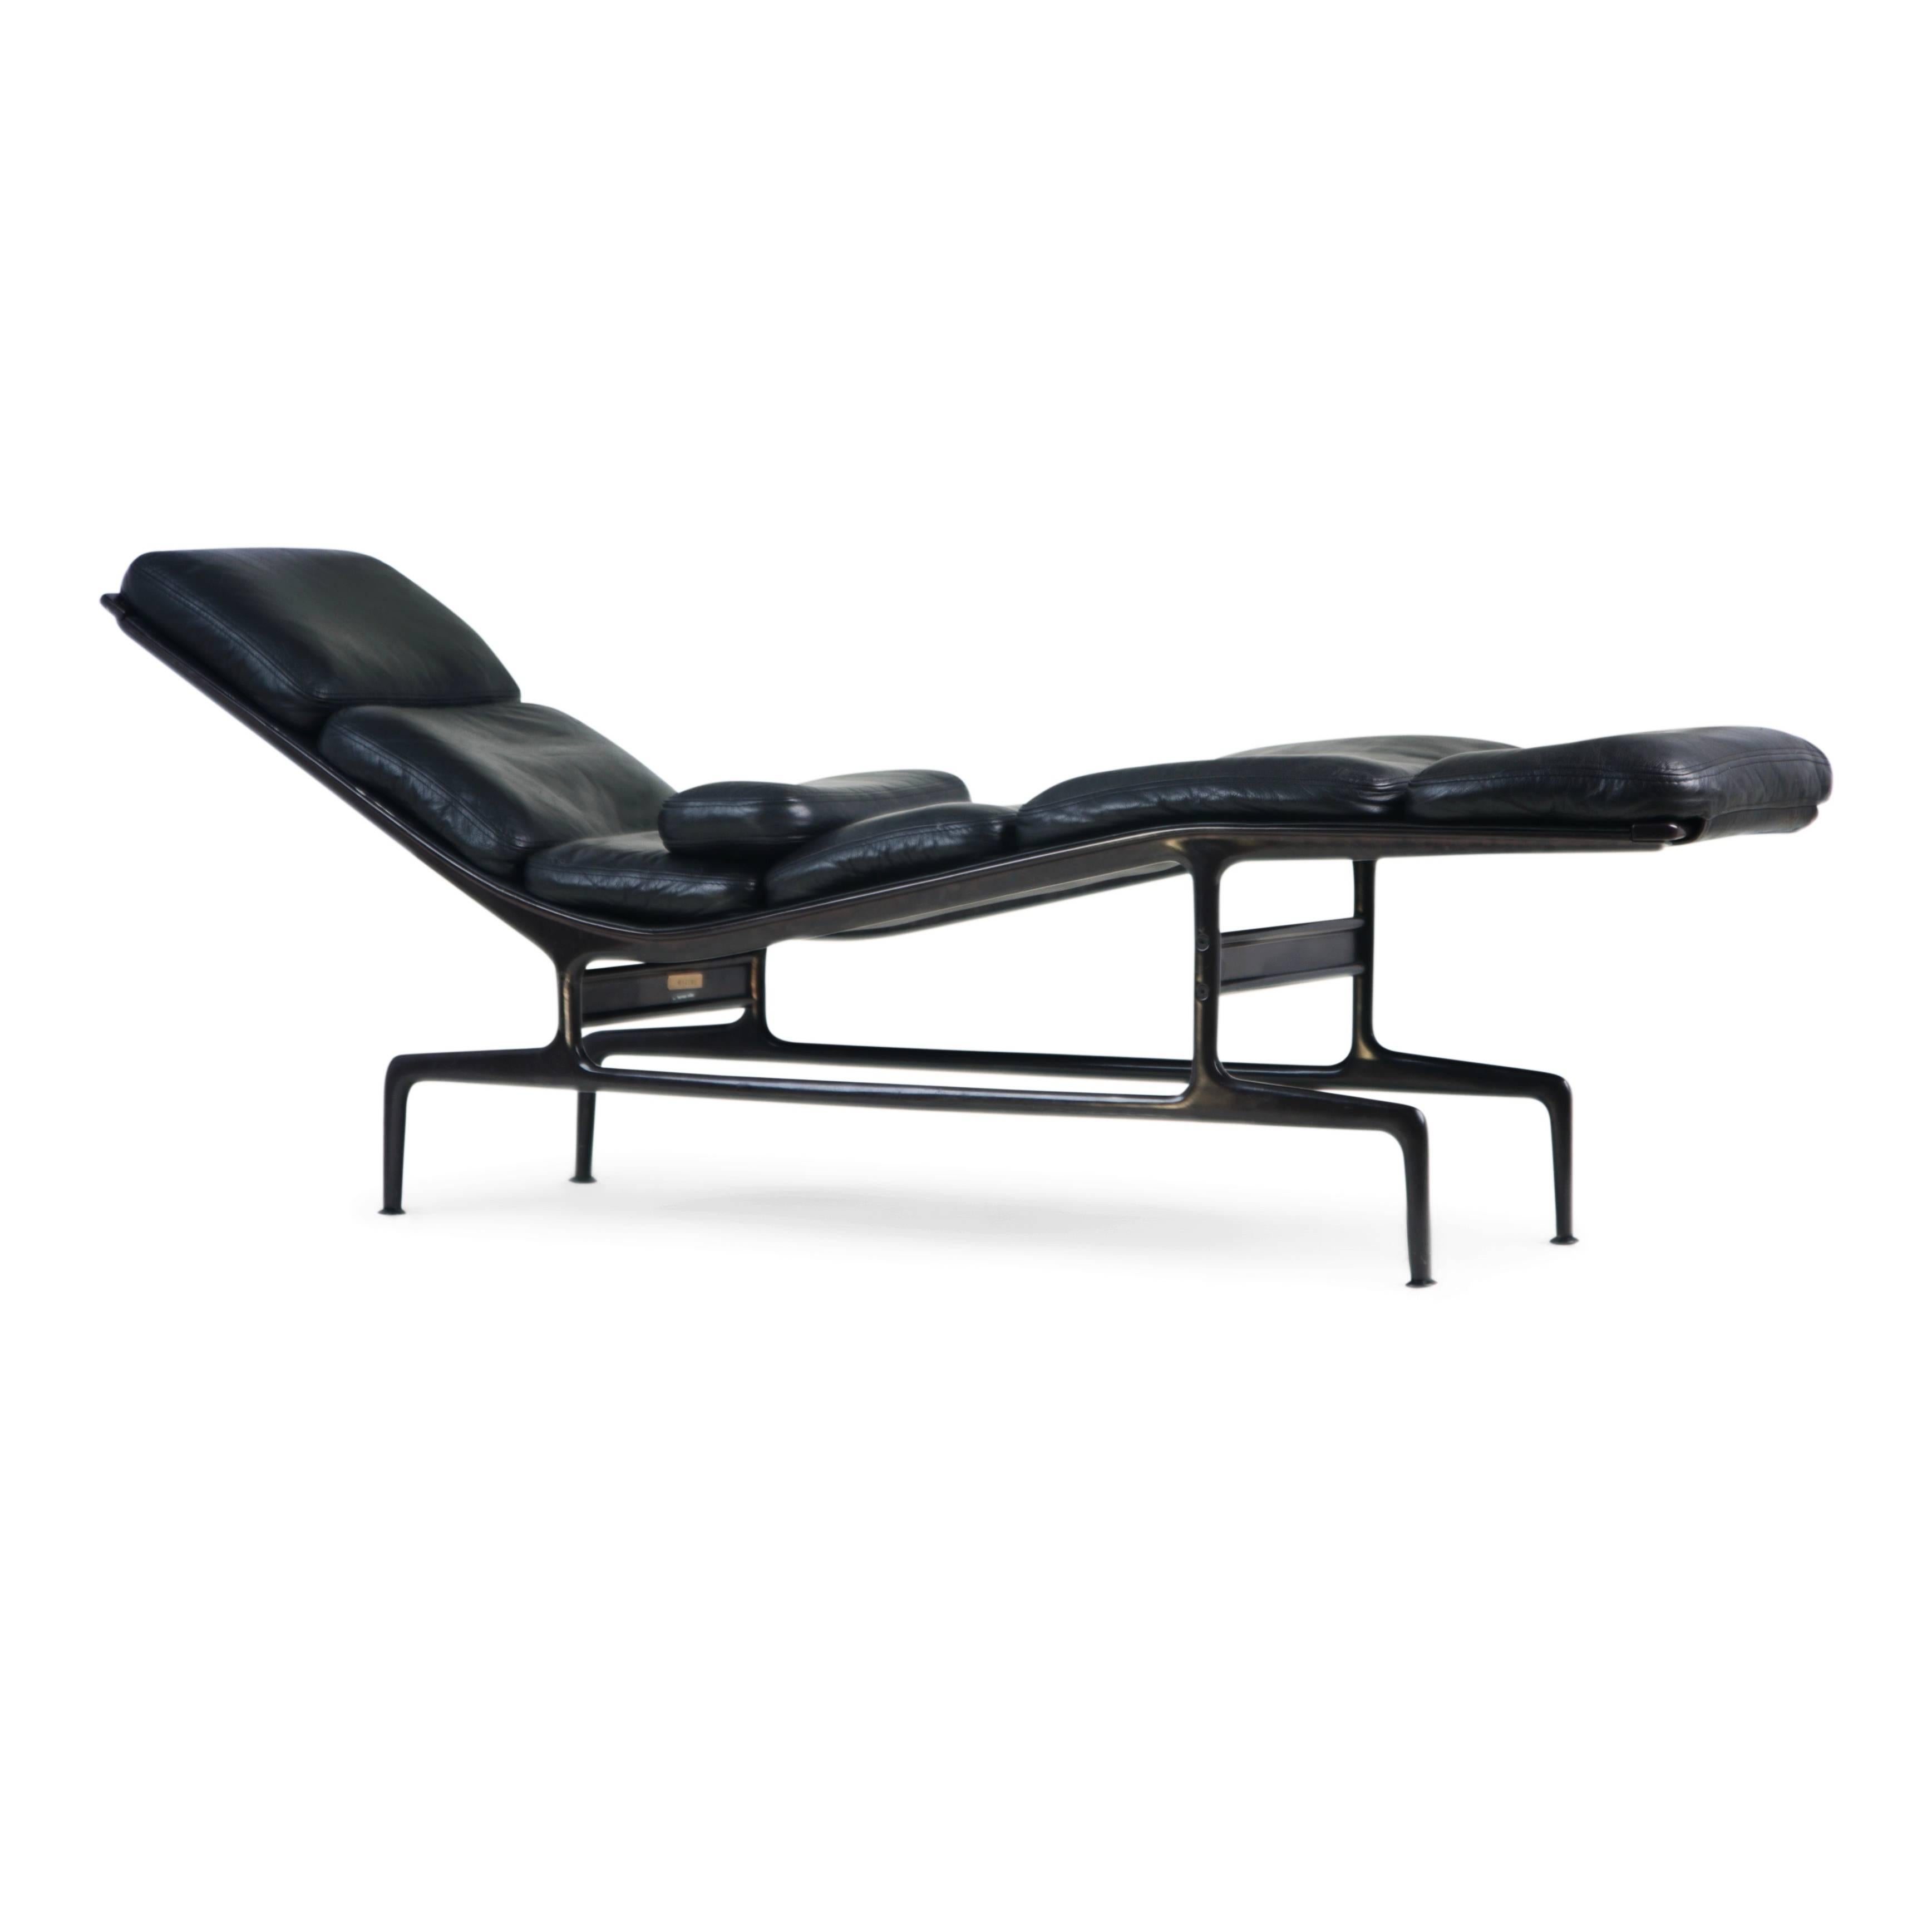 A handsome and well cared for example of the Billy Wilder chaise longue by Ray and Charles Eames for Herman Miller. In soft and supple high-quality black leather on a charcoal grey base. This example produced in 1988, with attached Herman Miller